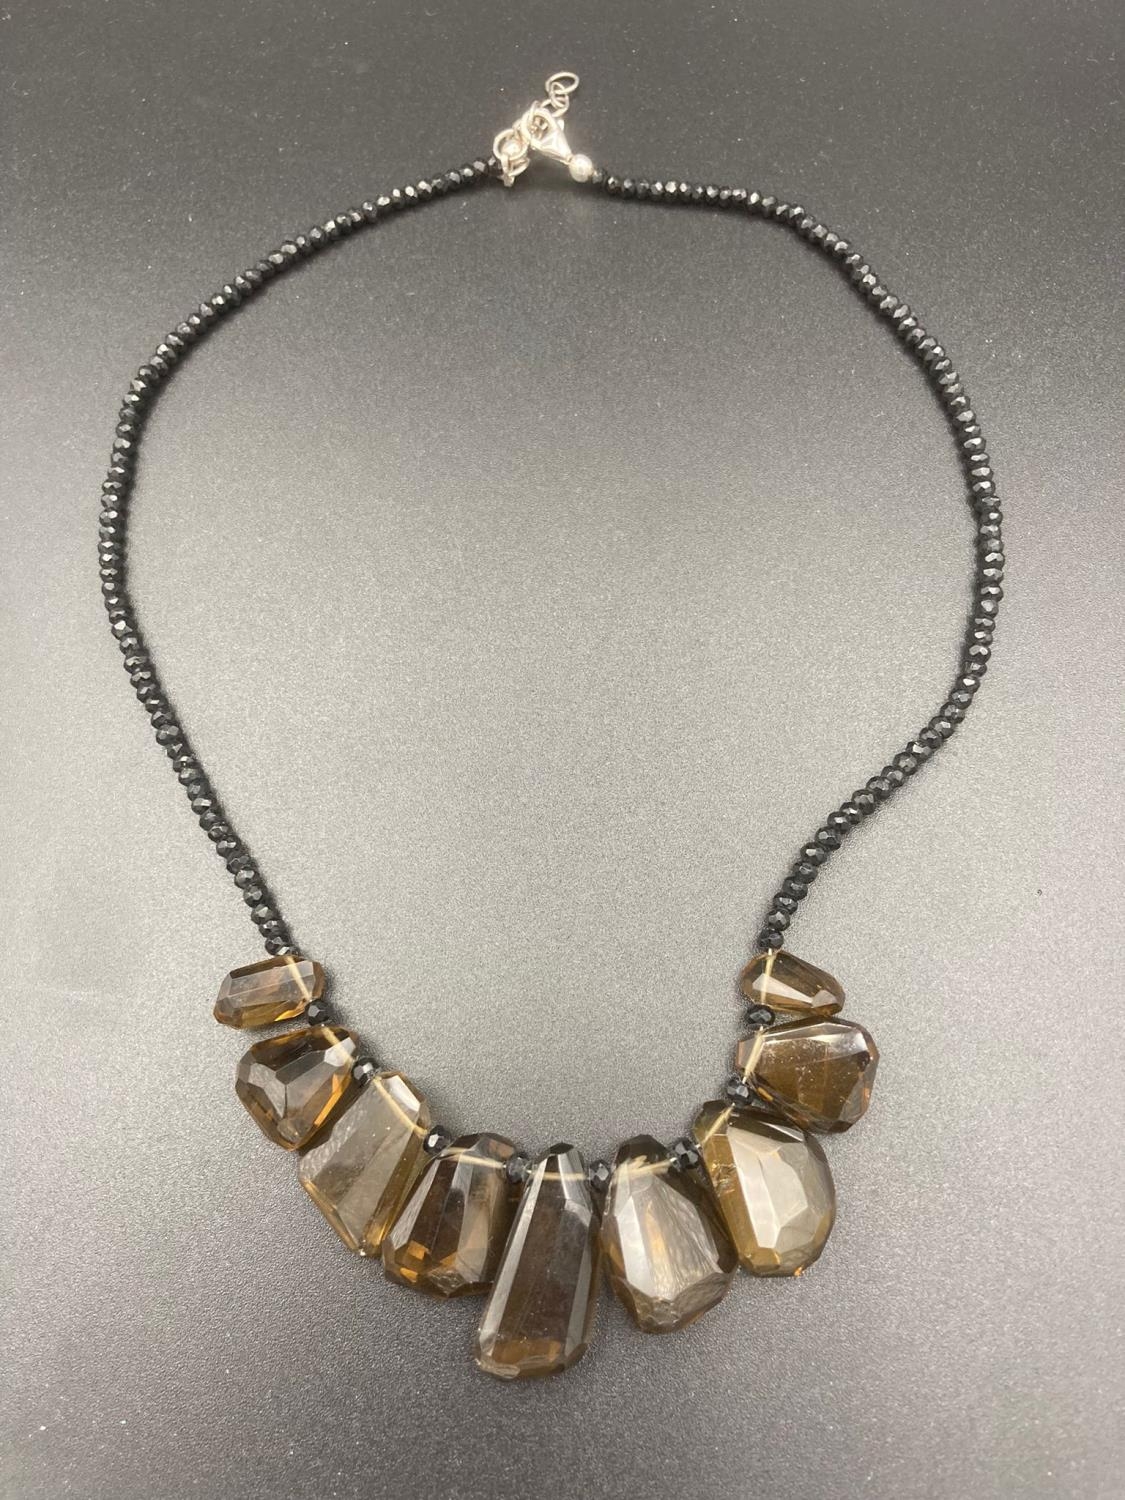 Vintage necklace silver mounted with jet and smoky quartz stones. Adjustable 44 to 48 cm. a/f.